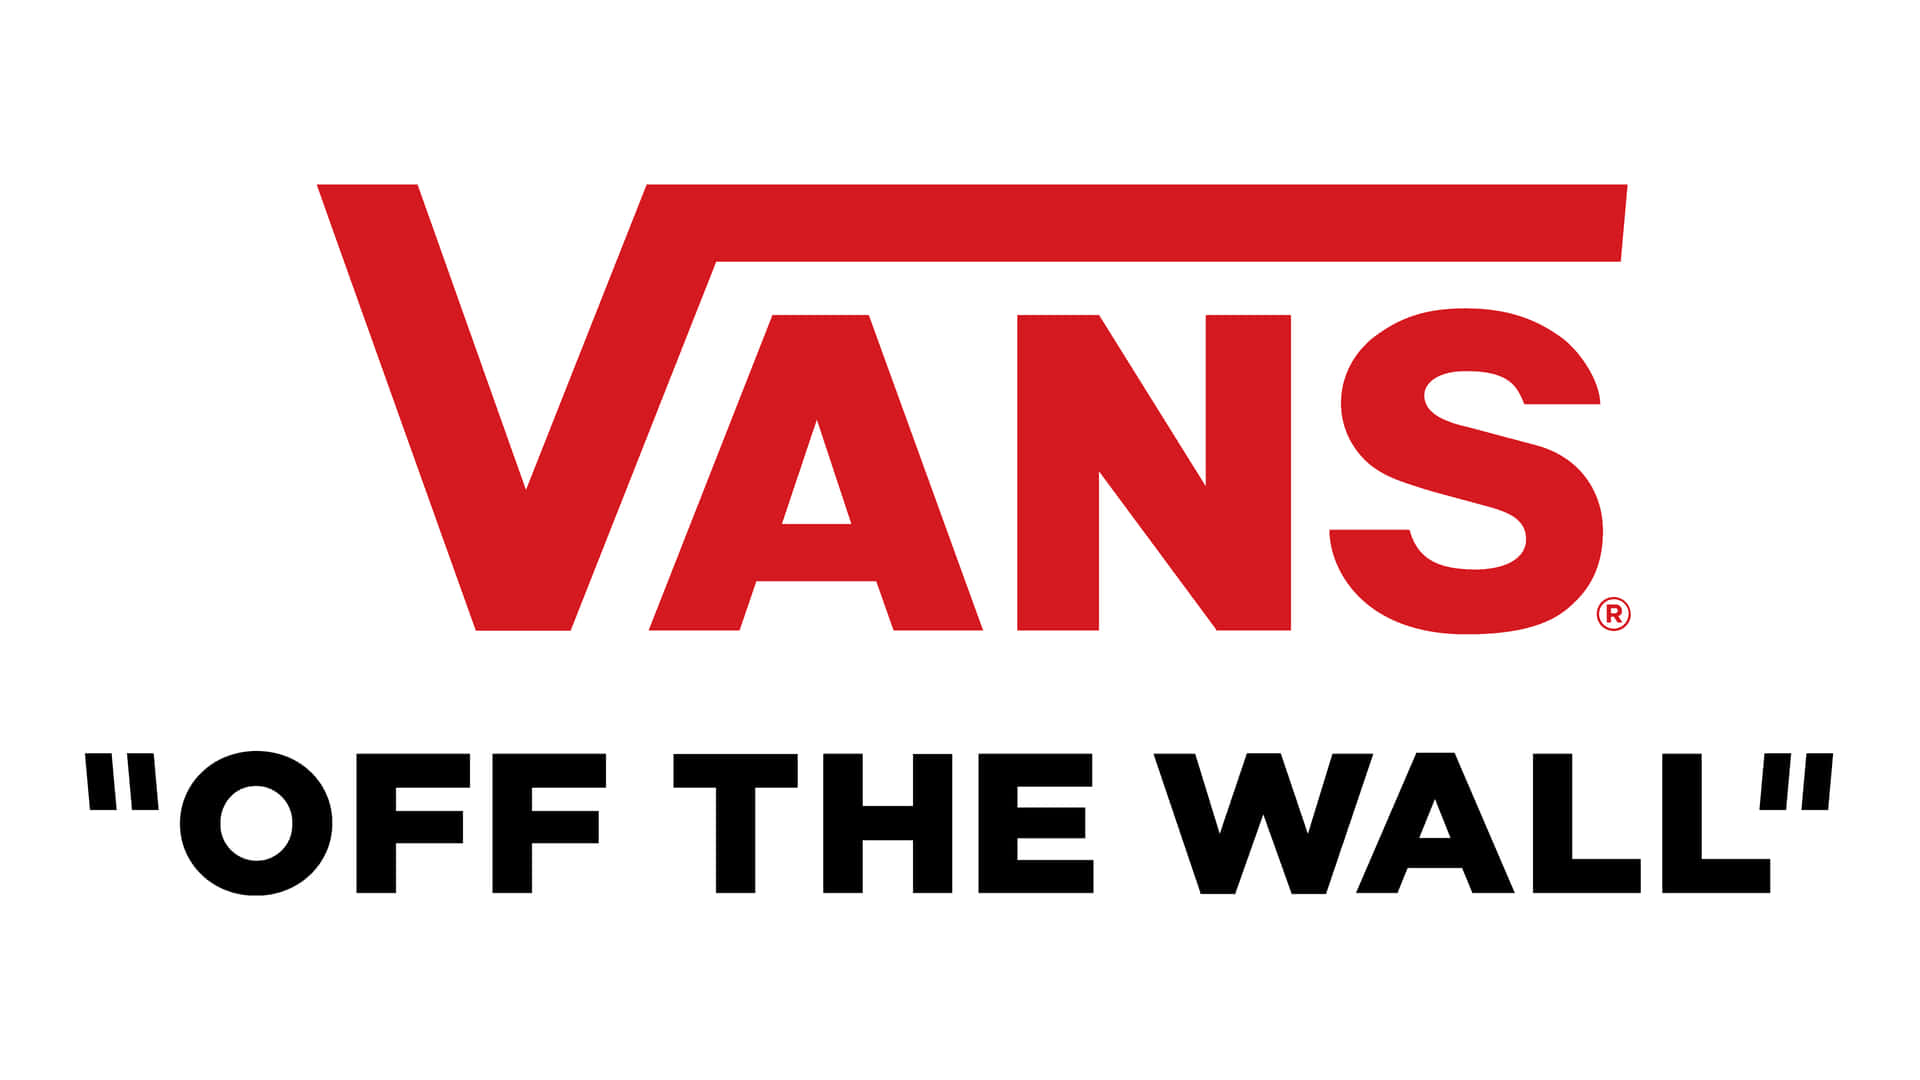 Classic Vans style for any situation